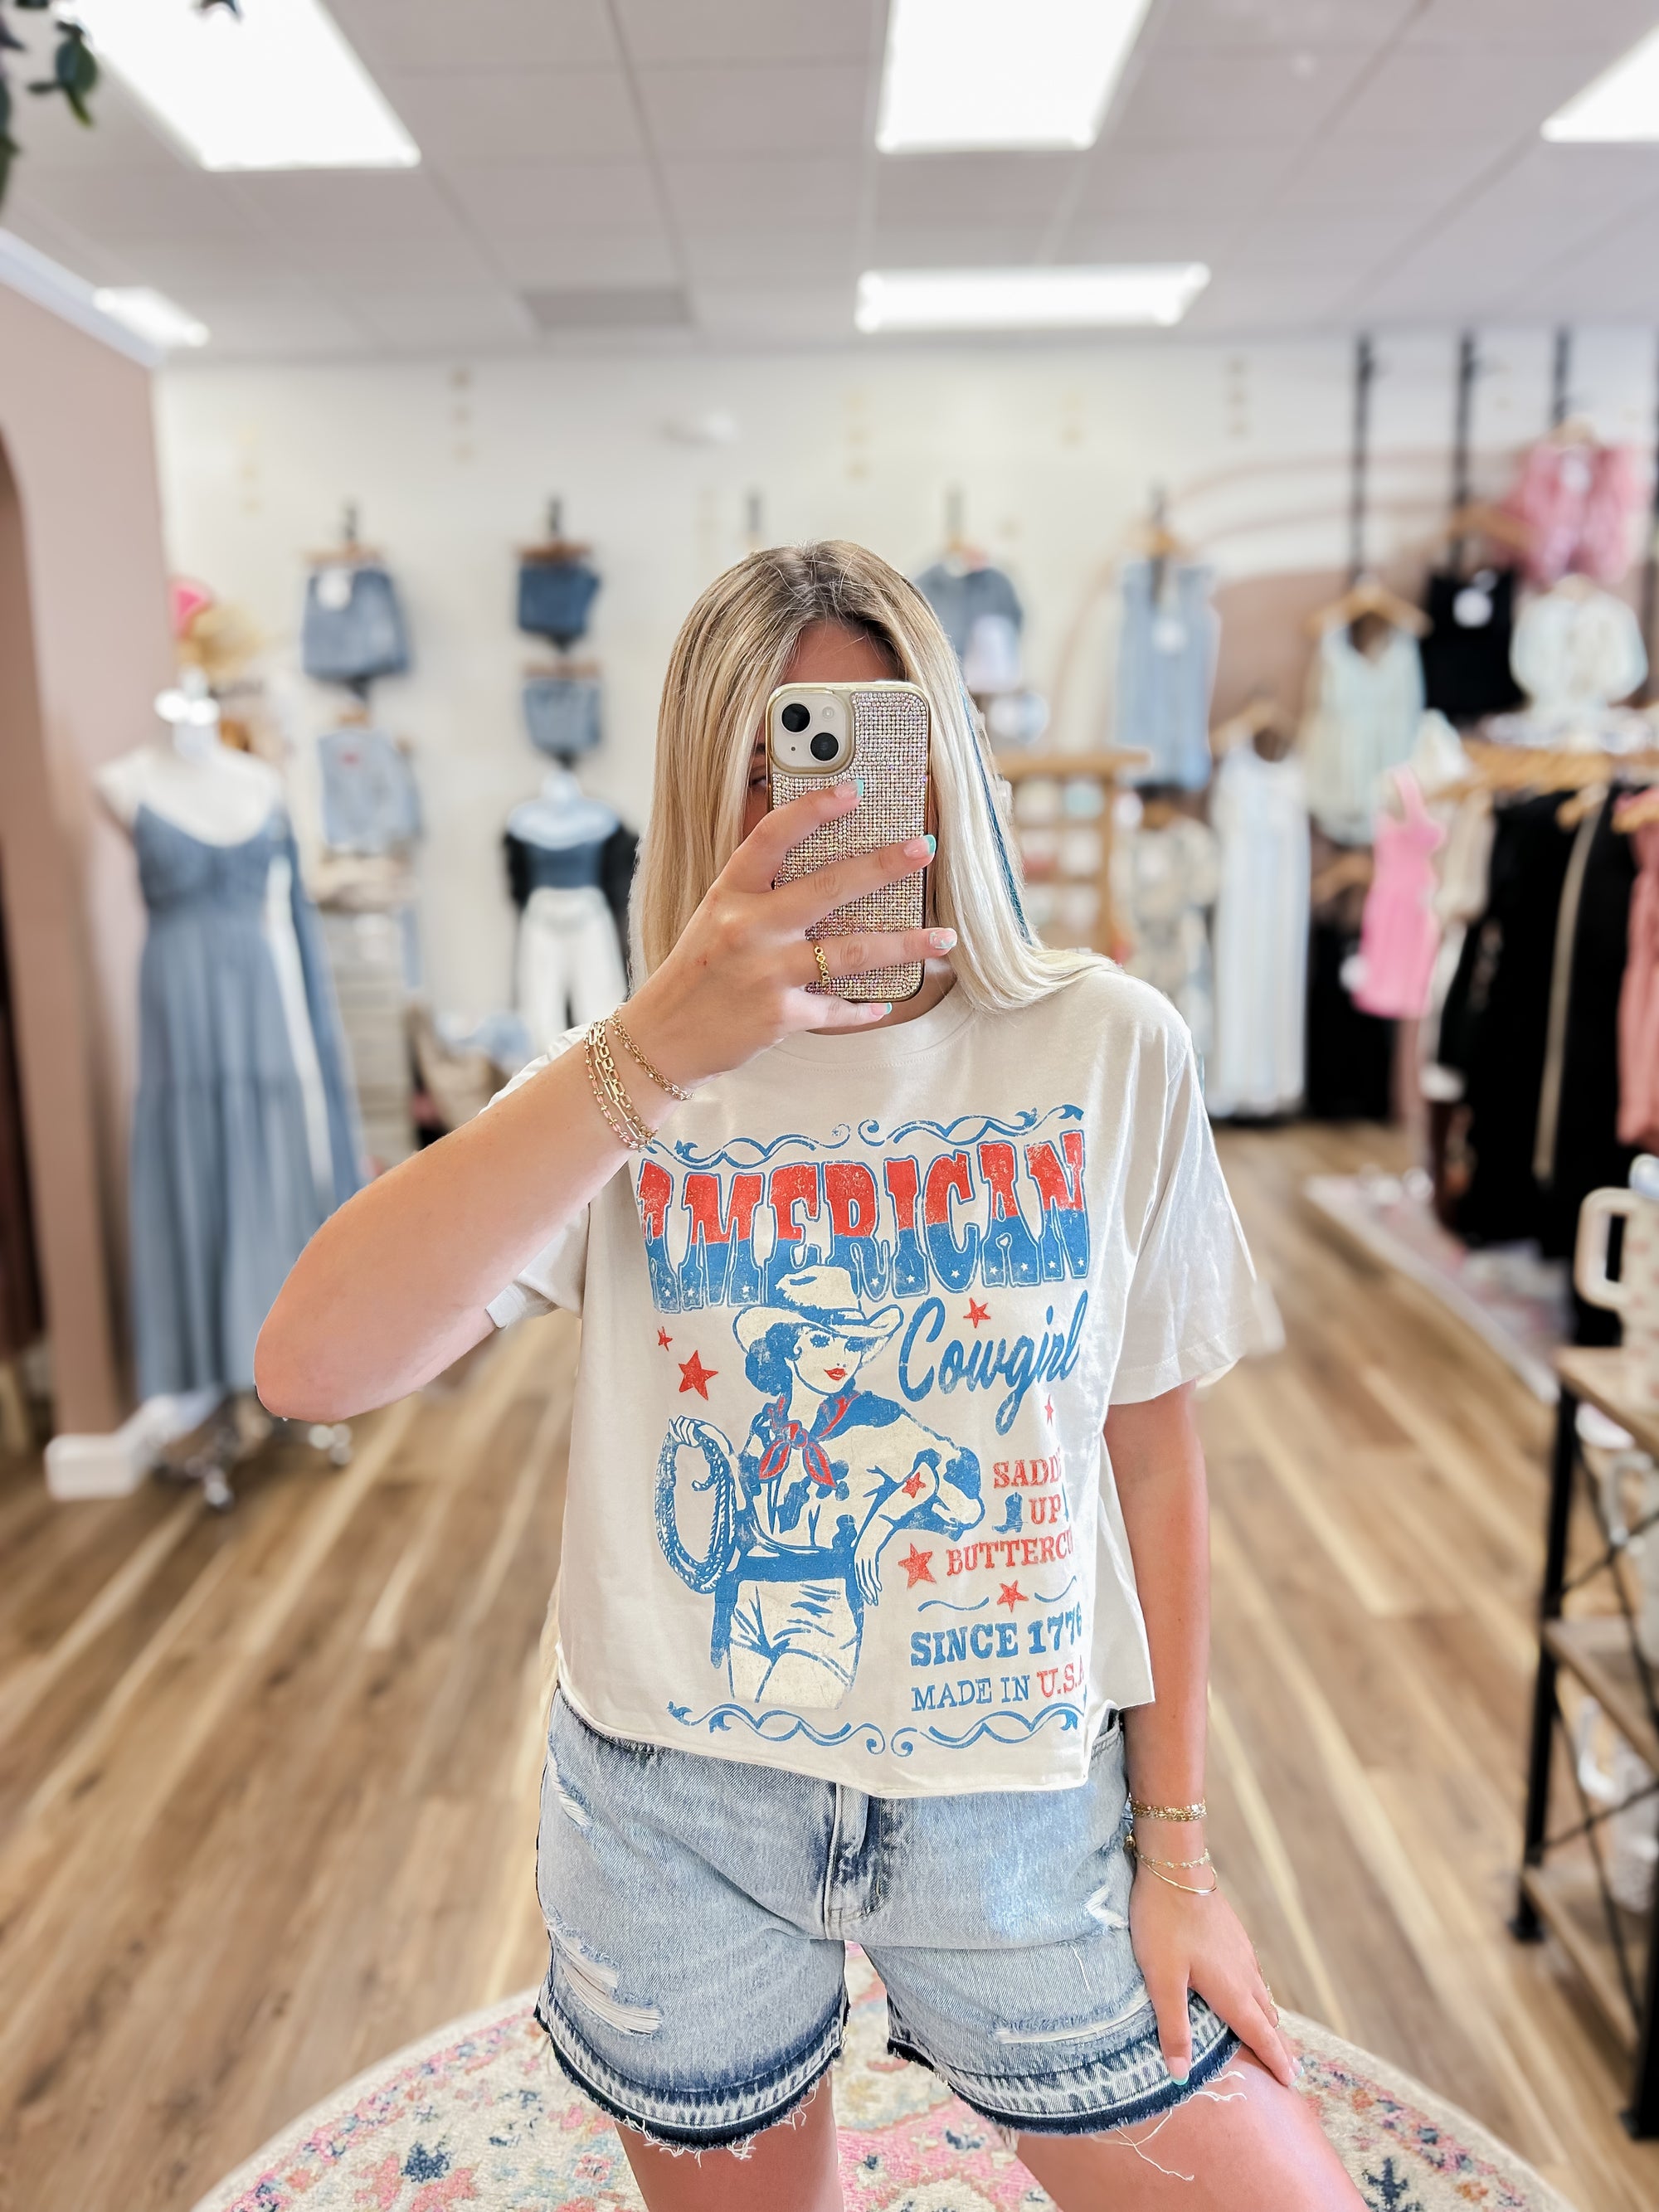 American Cowgirl Vintage Antique White Graphic Tee